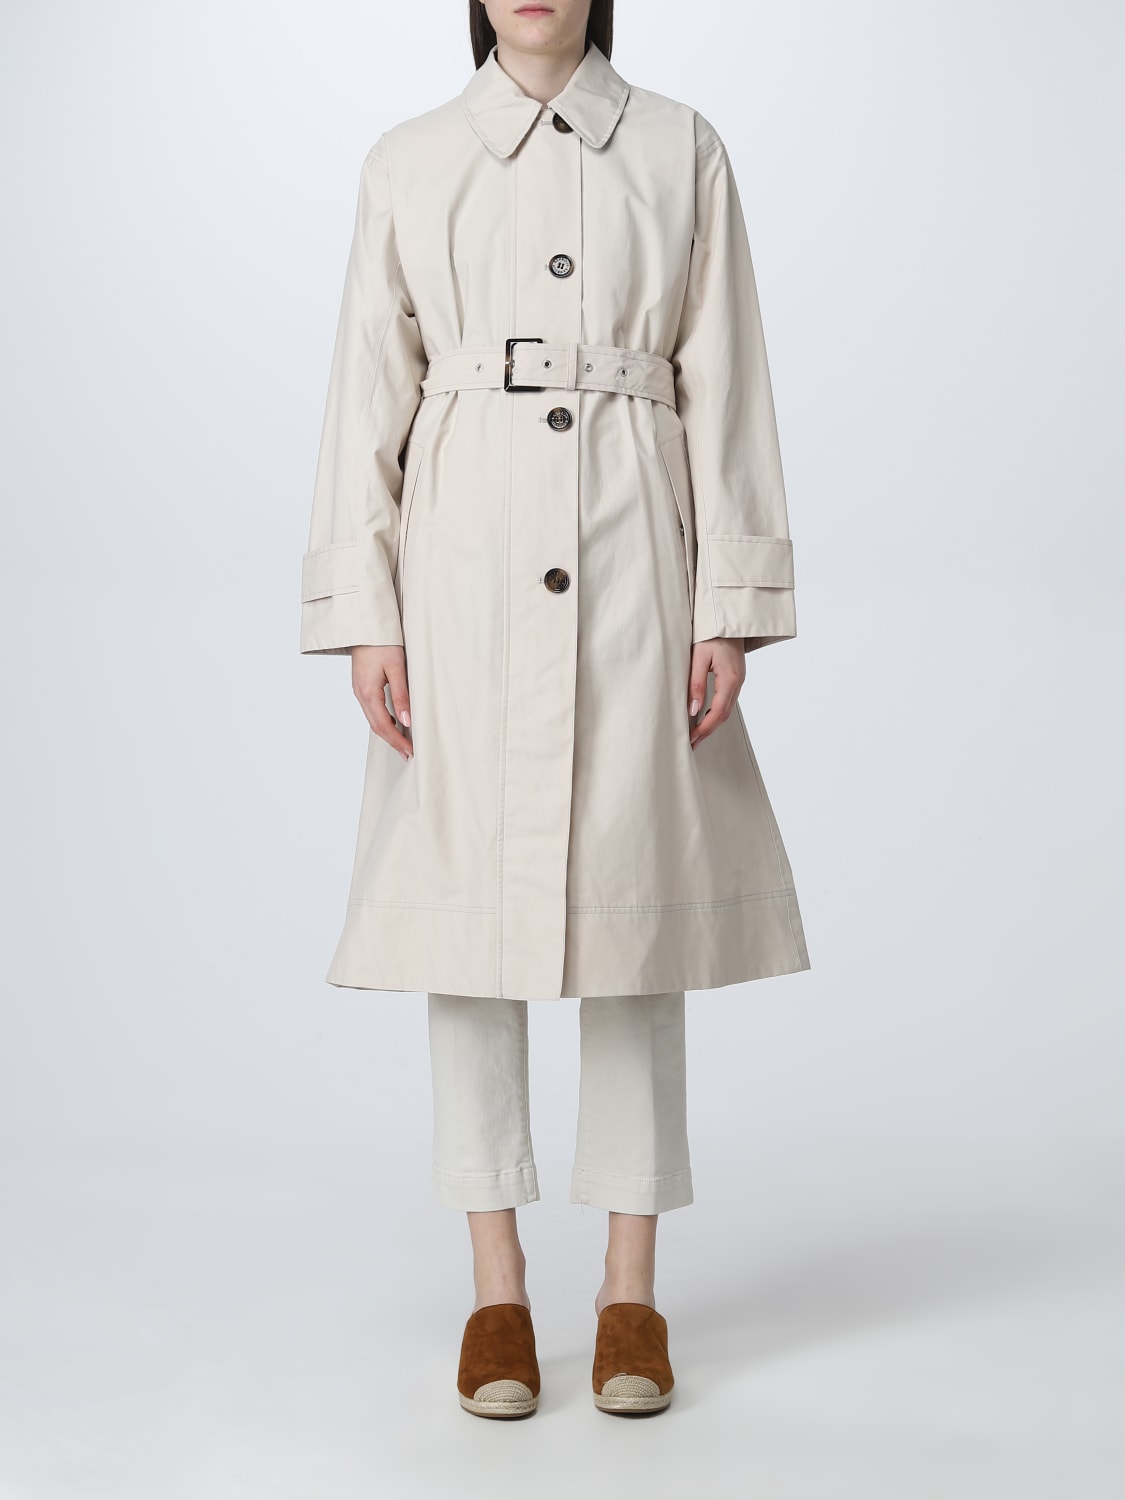 Barbour Outlet: trench coat for woman - Beige | Barbour trench